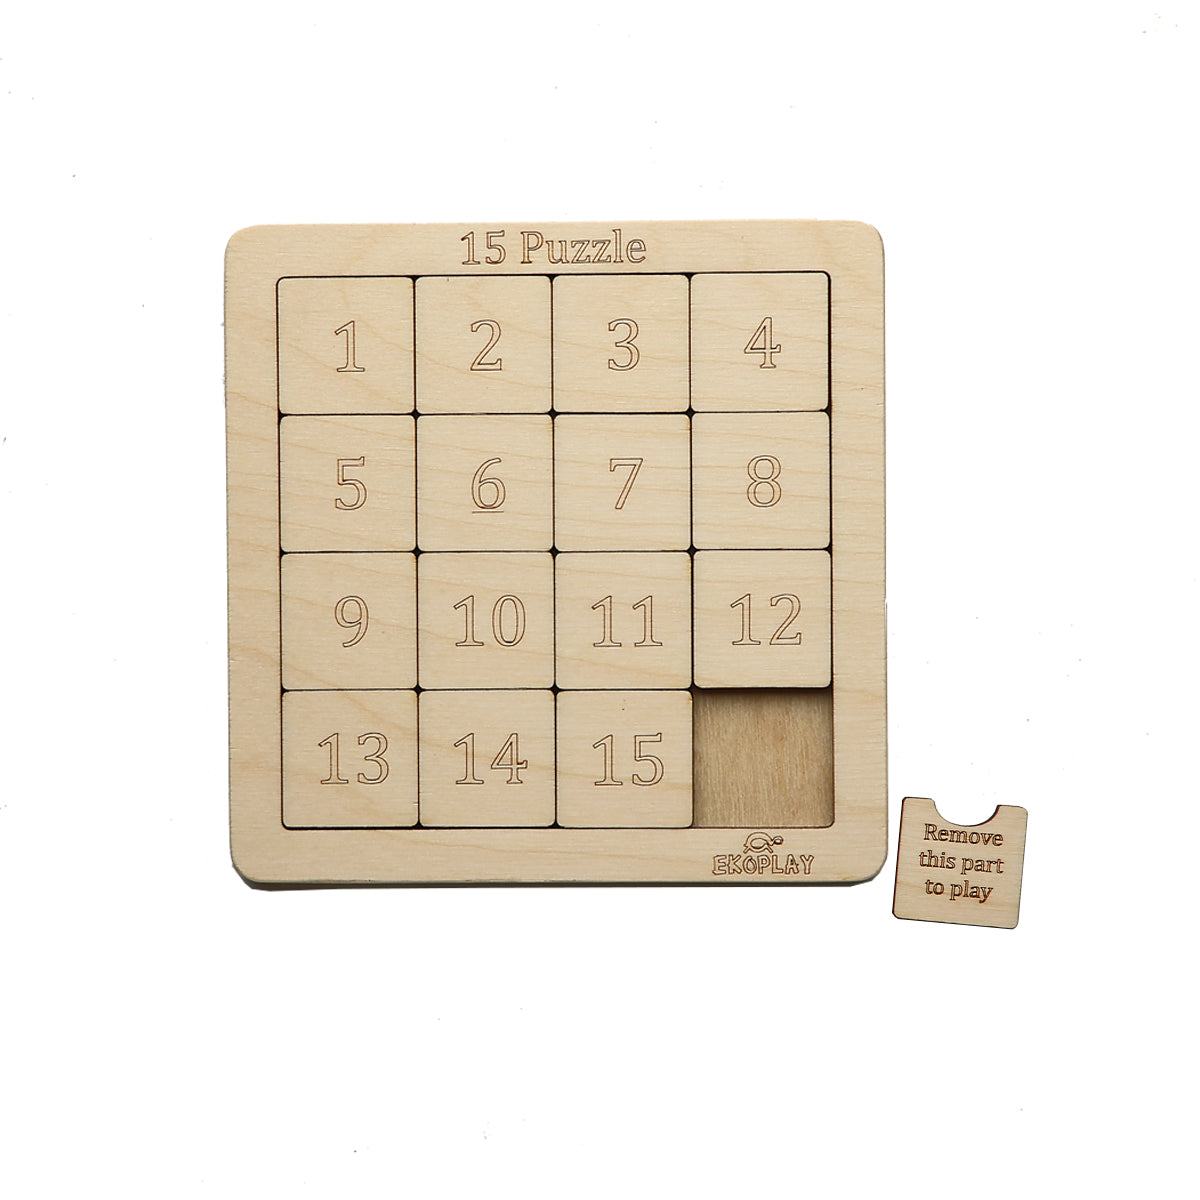 Buy Wooden 15 Puzzle Board Game - SkilloToys.com